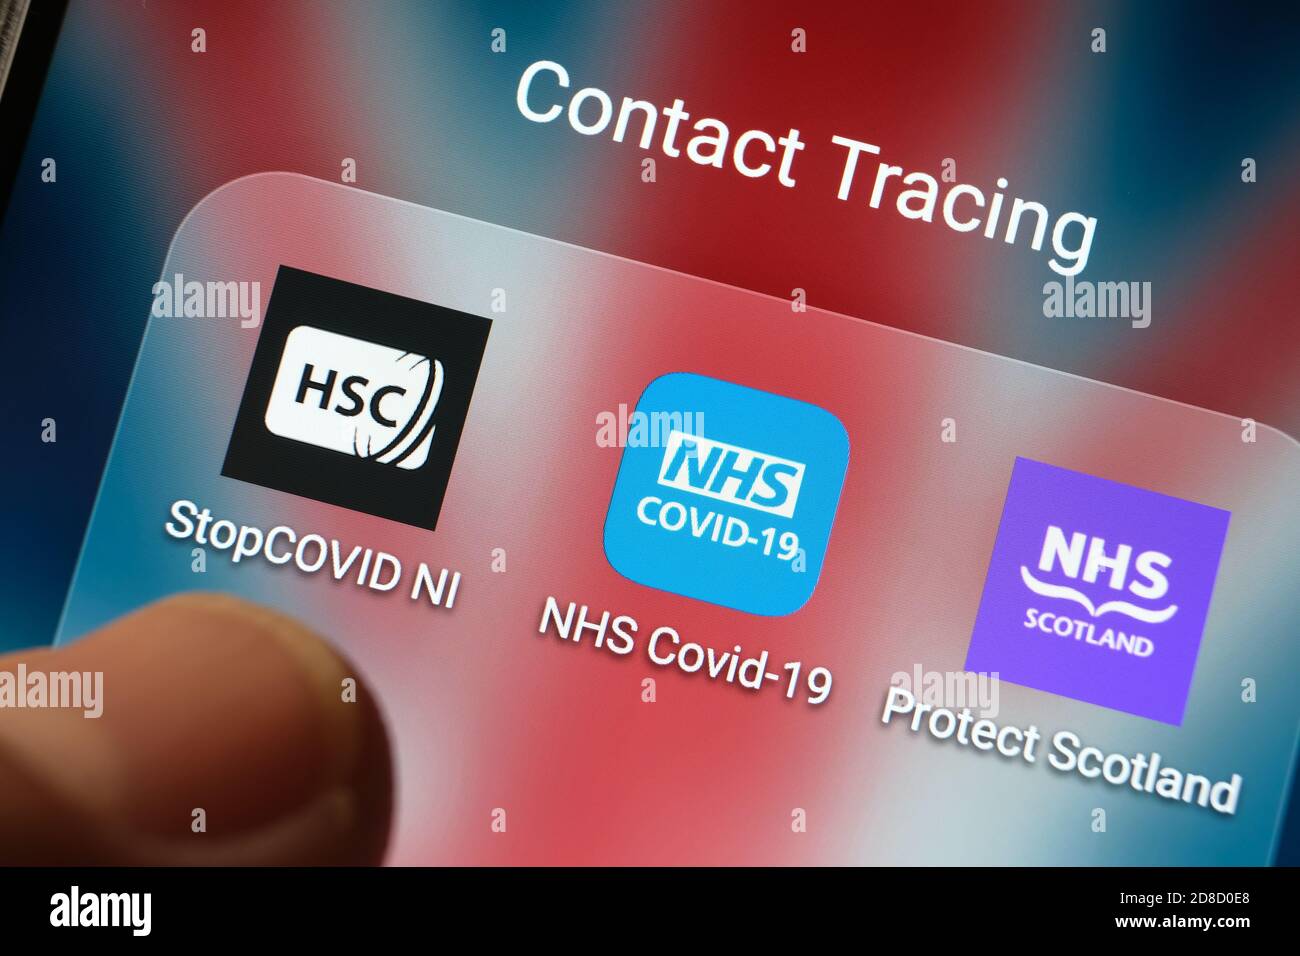 United Kingdom's NHS COVID-19 app and other contact tracing apps seen on one screen and blurred fingertip pointing on them. Stock Photo